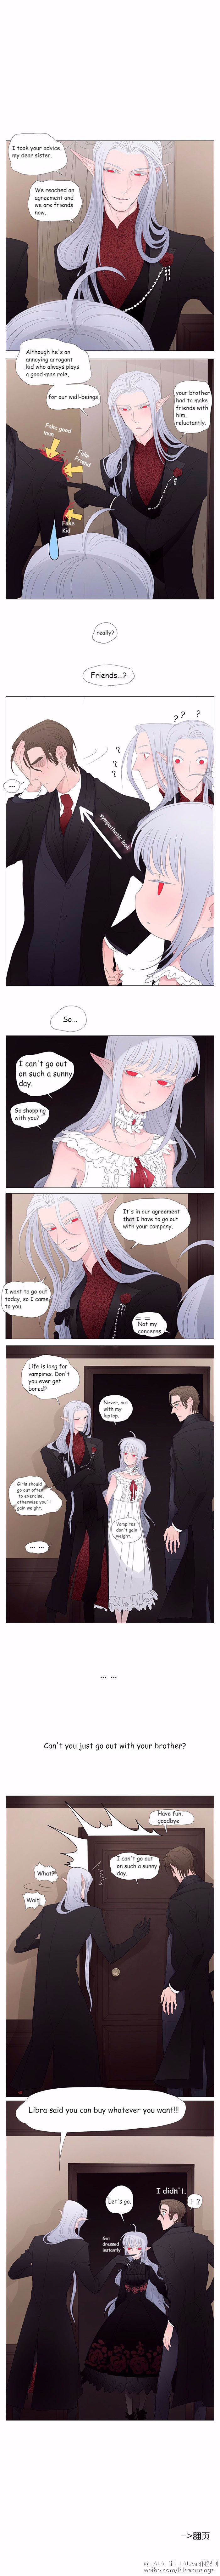 Vampire And Hunter - Page 2